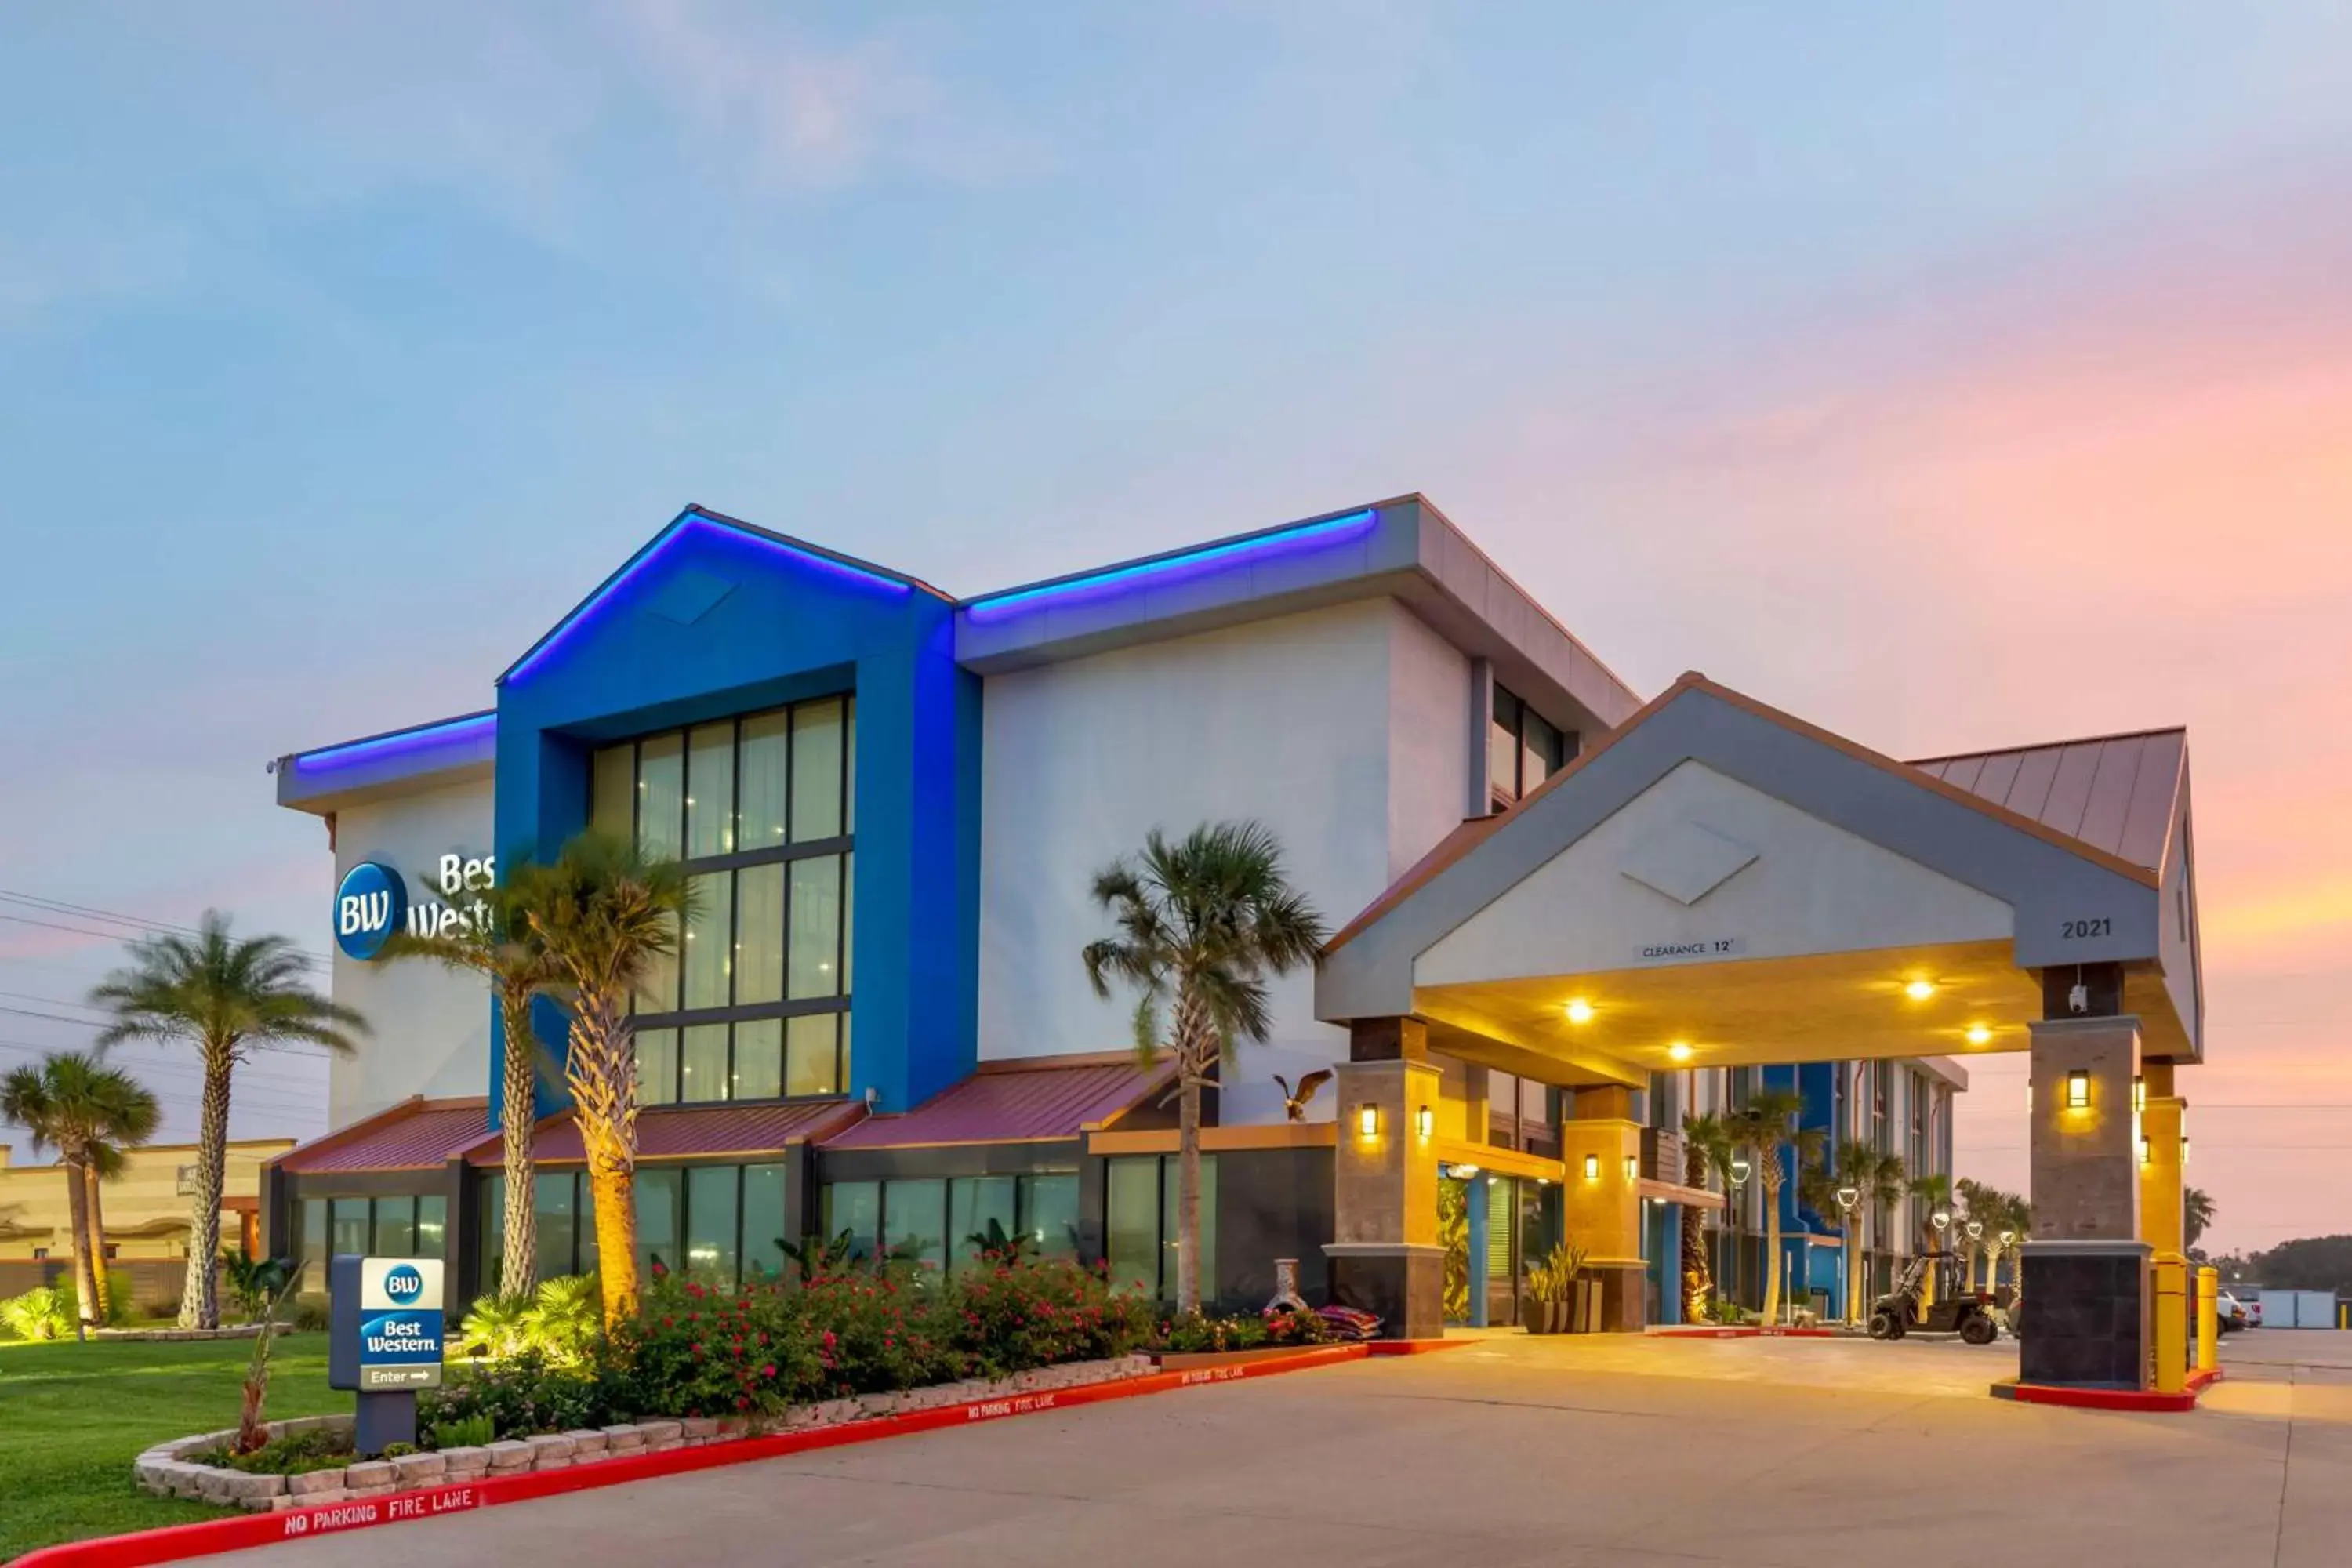 Property Building in Best Western Corpus Christi Airport Hotel